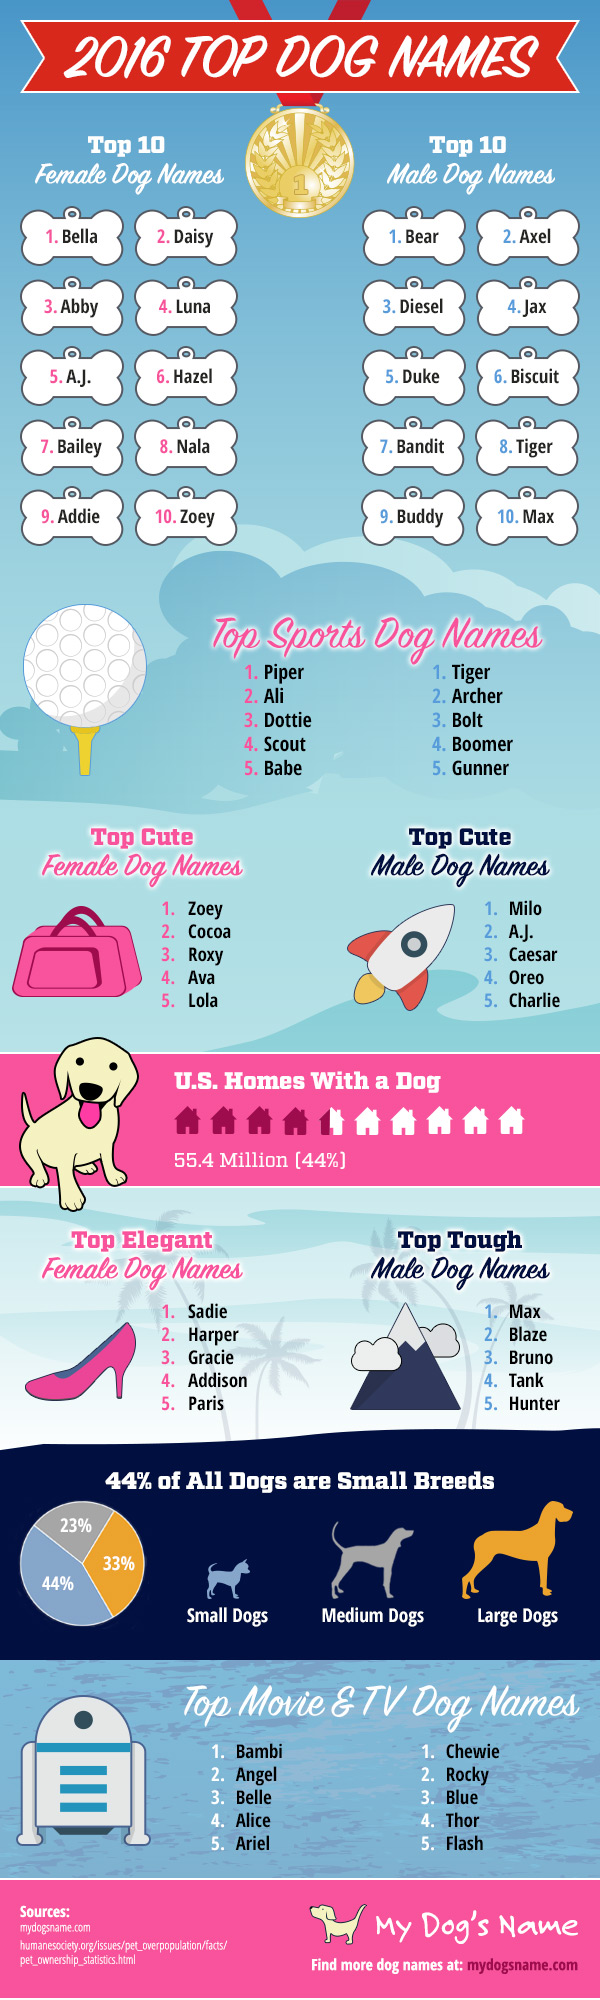 Dogs s names are. Top Dog names. Dogs names male. Dog names 2022. Female Dogs name.